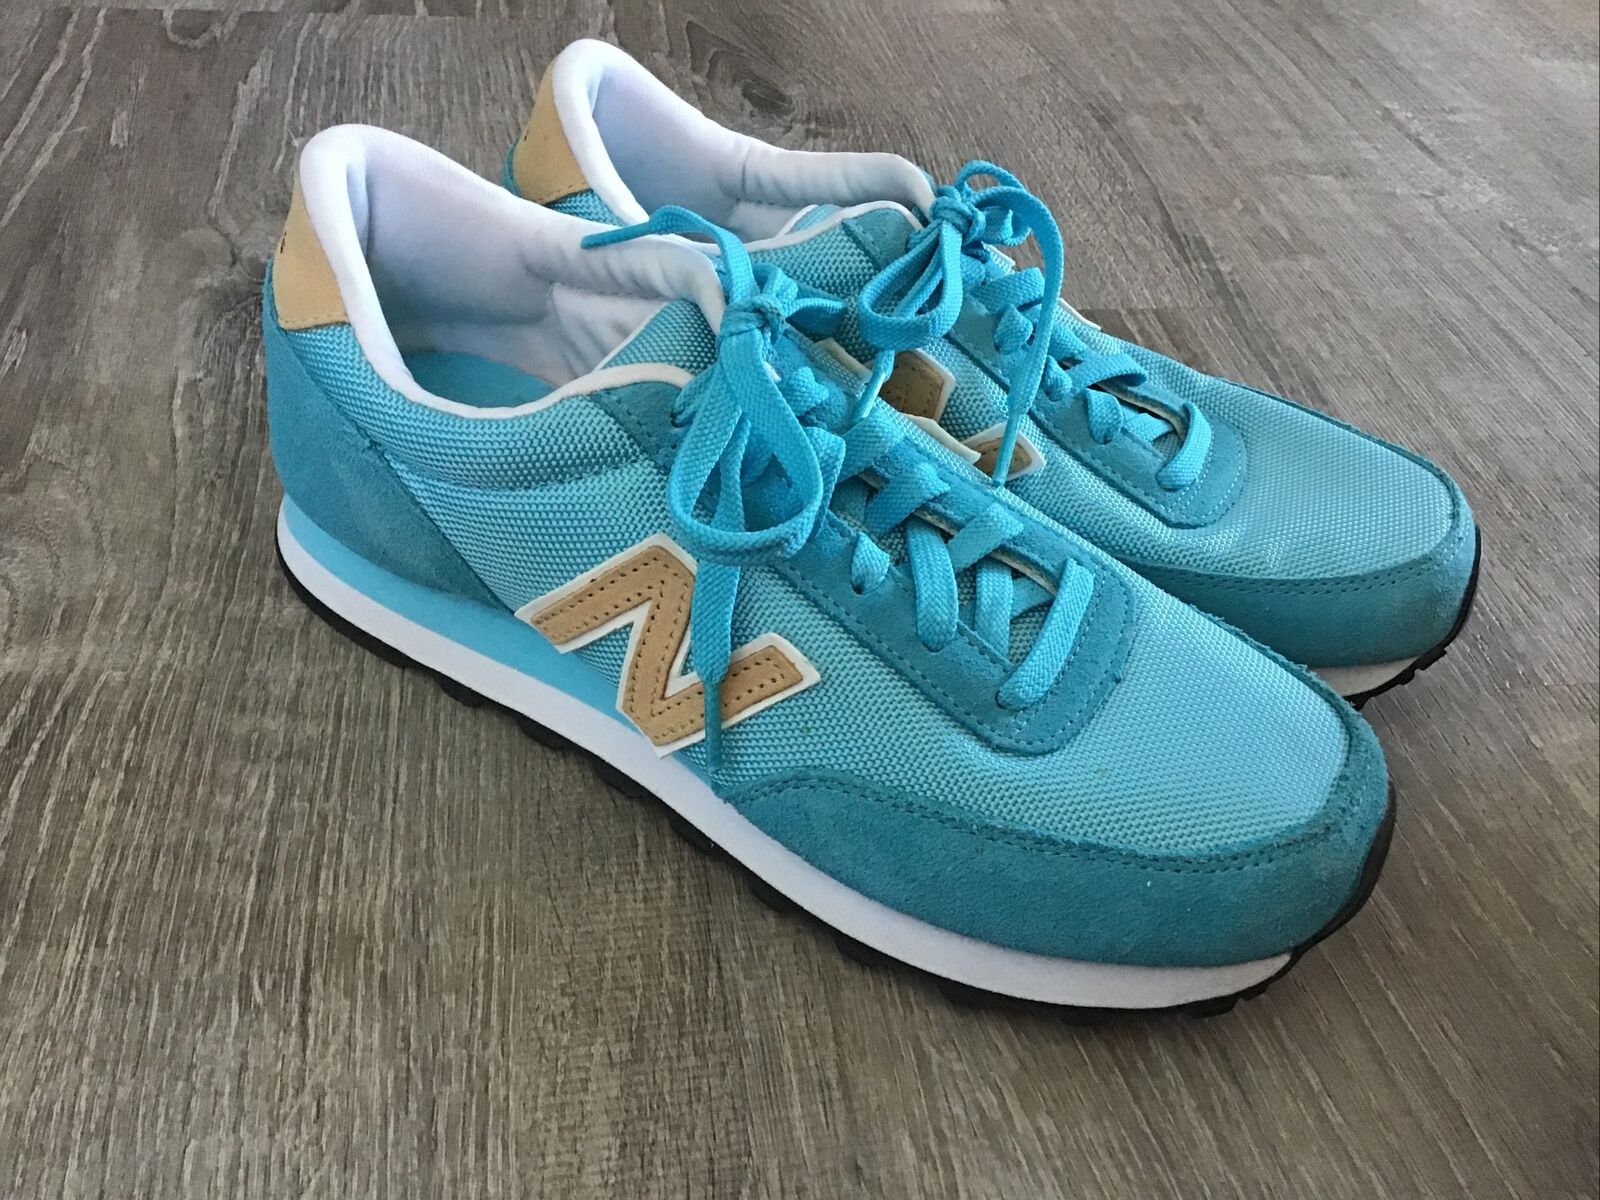 New Balance 501 Blue Sneakers Lace Phoenix Mall Over item handling 10 Up WL510BPA Women’s